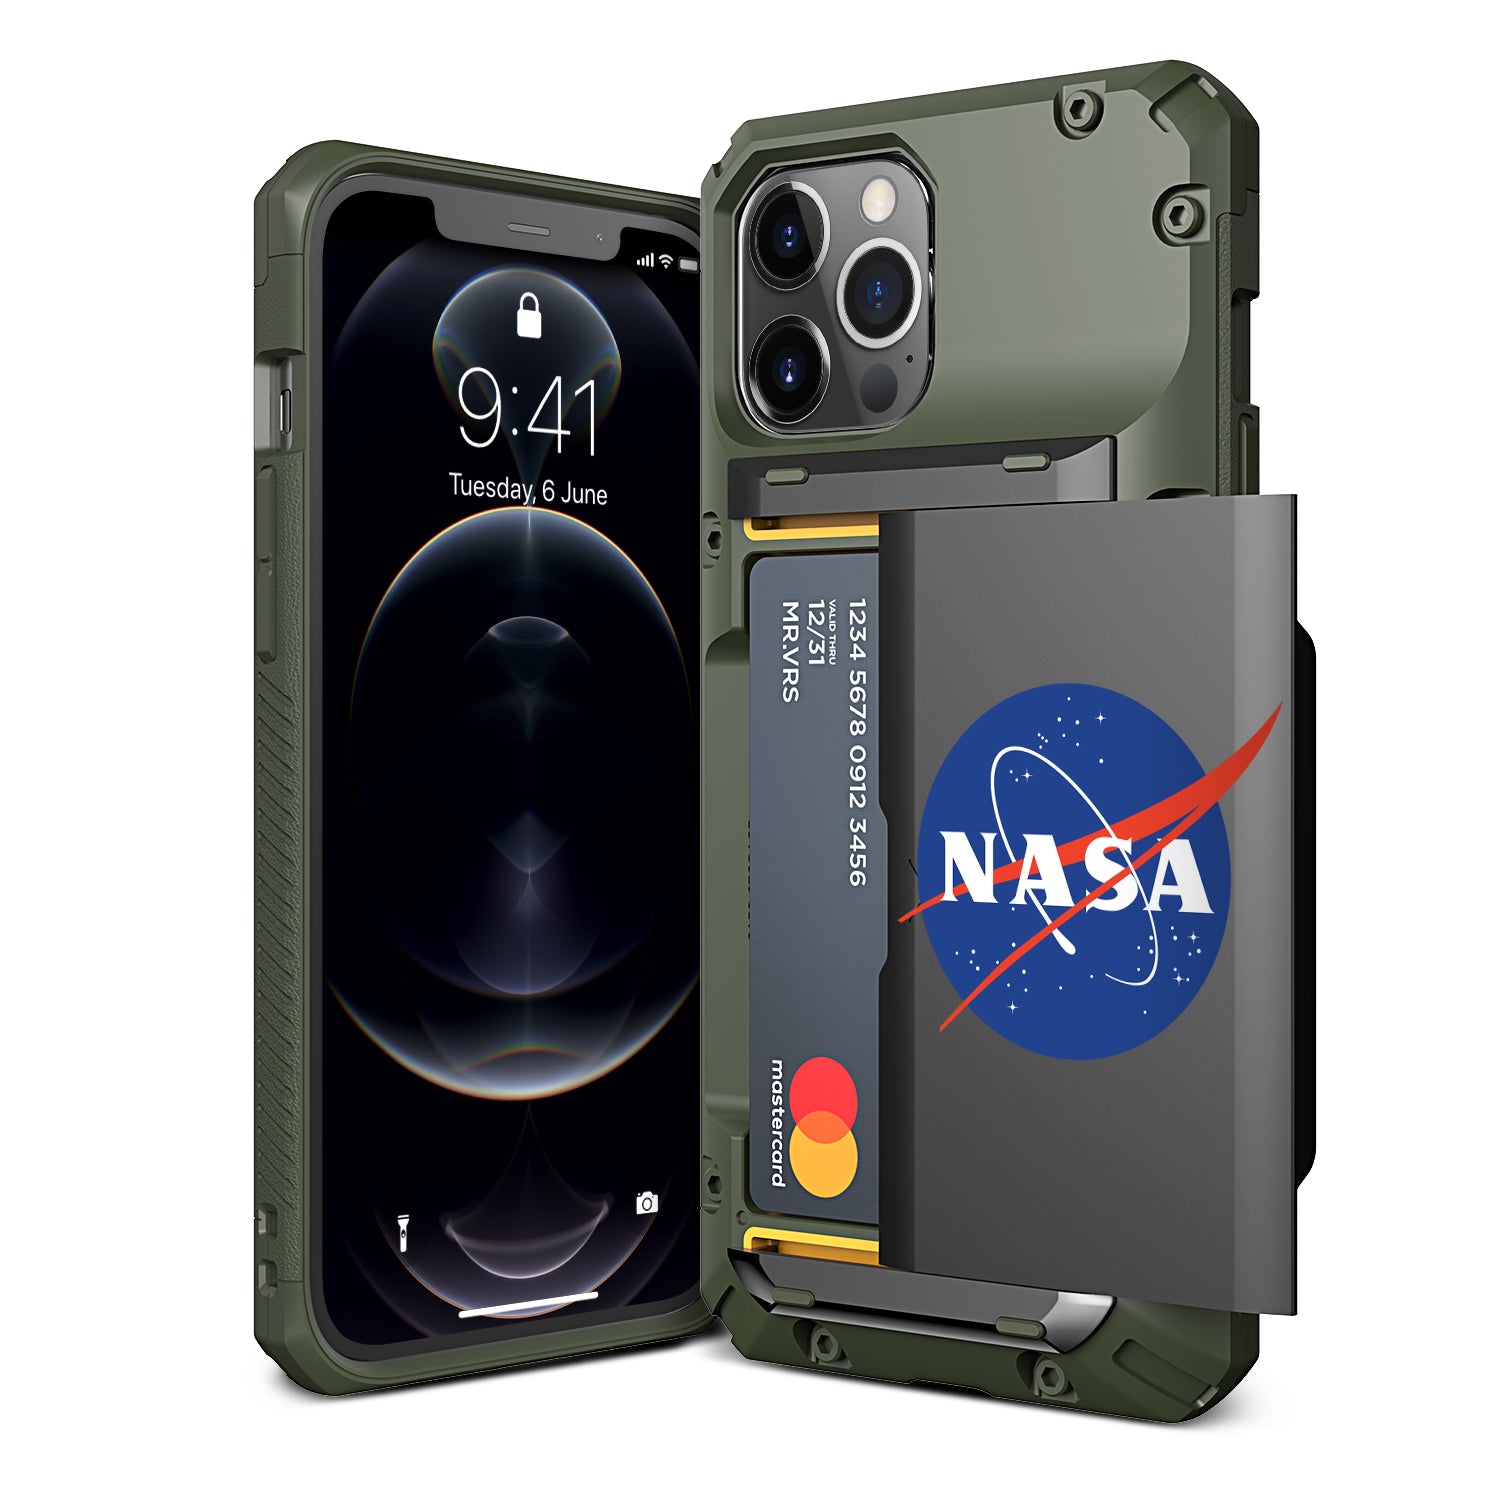 iPhone 12 Pro Max Case Damda Glide Pro NASA High quality TPU material Body and Real Metal Stripe for extreme drop protection Sufficient 3-4 card tough storage that heavily limits wireless charging.